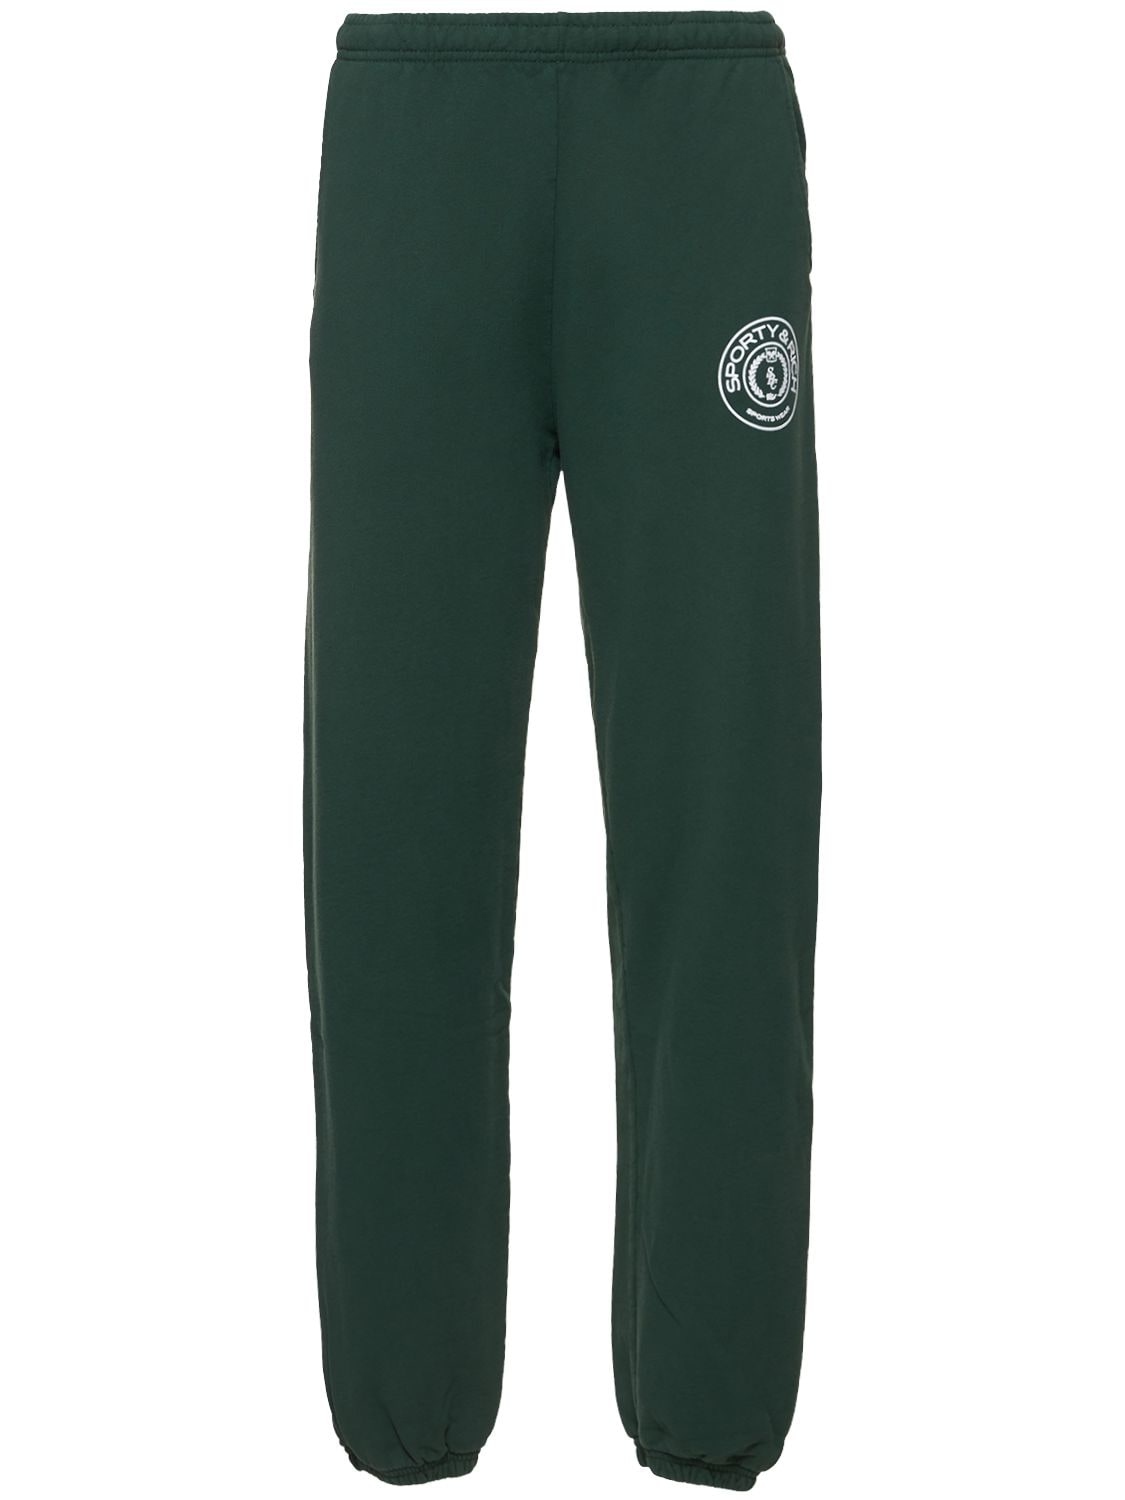 SPORTY AND RICH CONNECTICUT FLOCKED SWEATPANTS